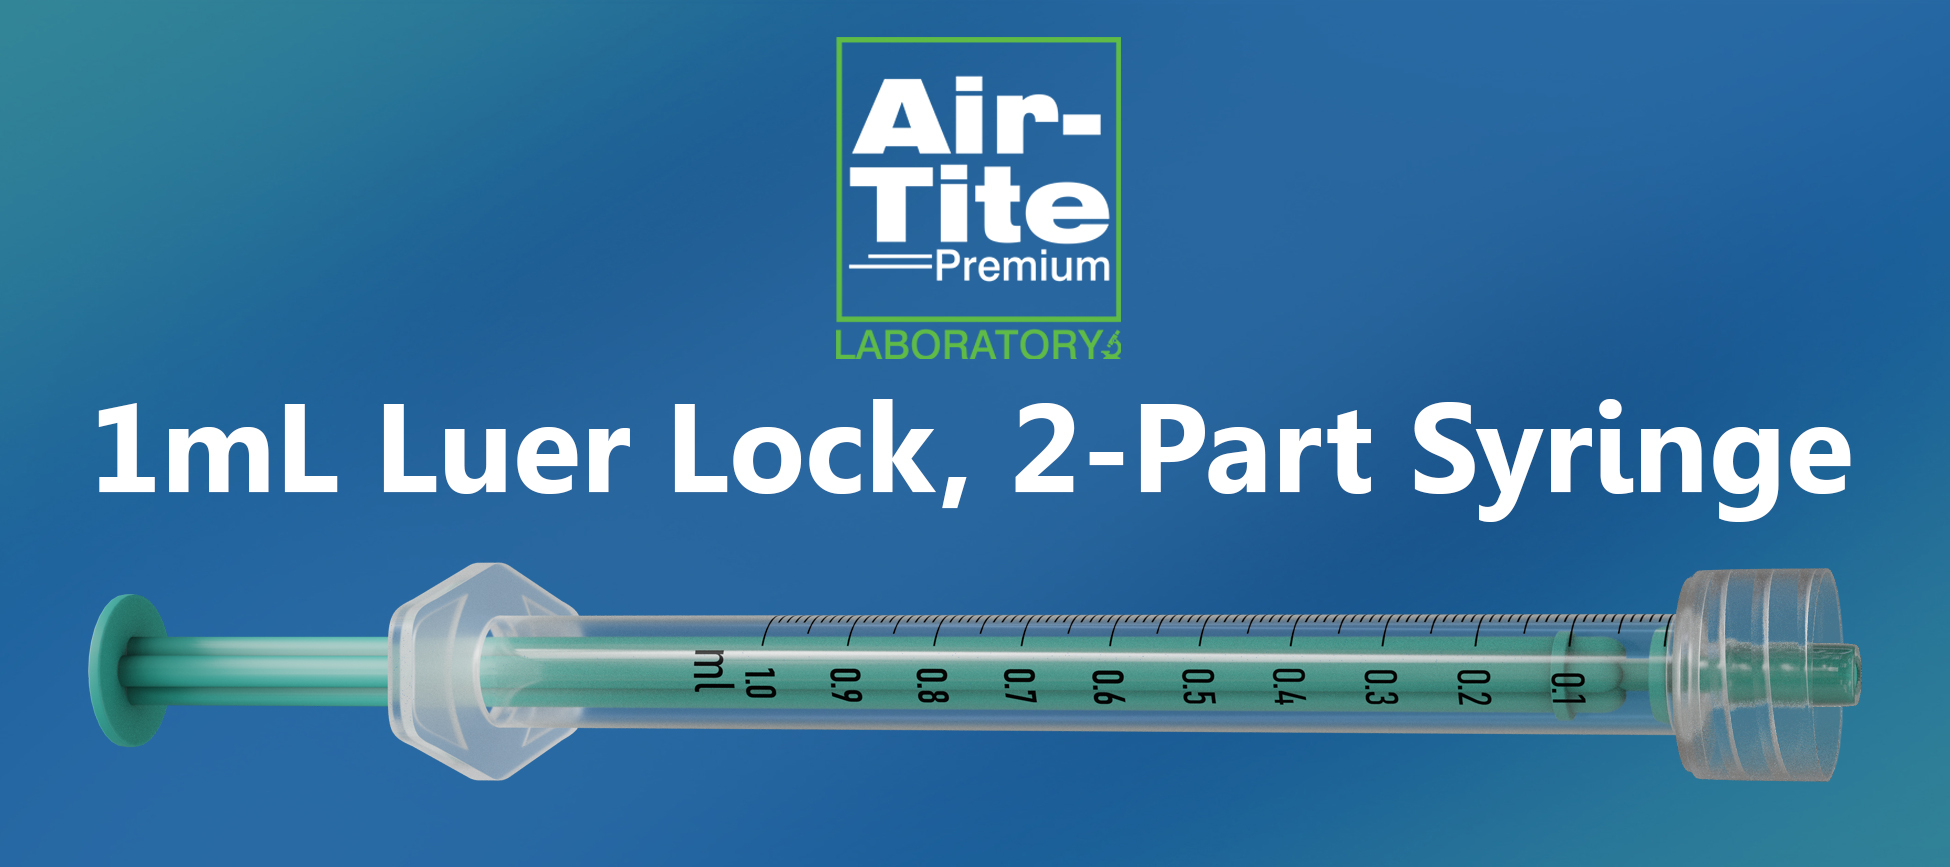 Air-Tite Introduces New 1mL Luer Lock 2-Part Syringe - Air-Tite Products